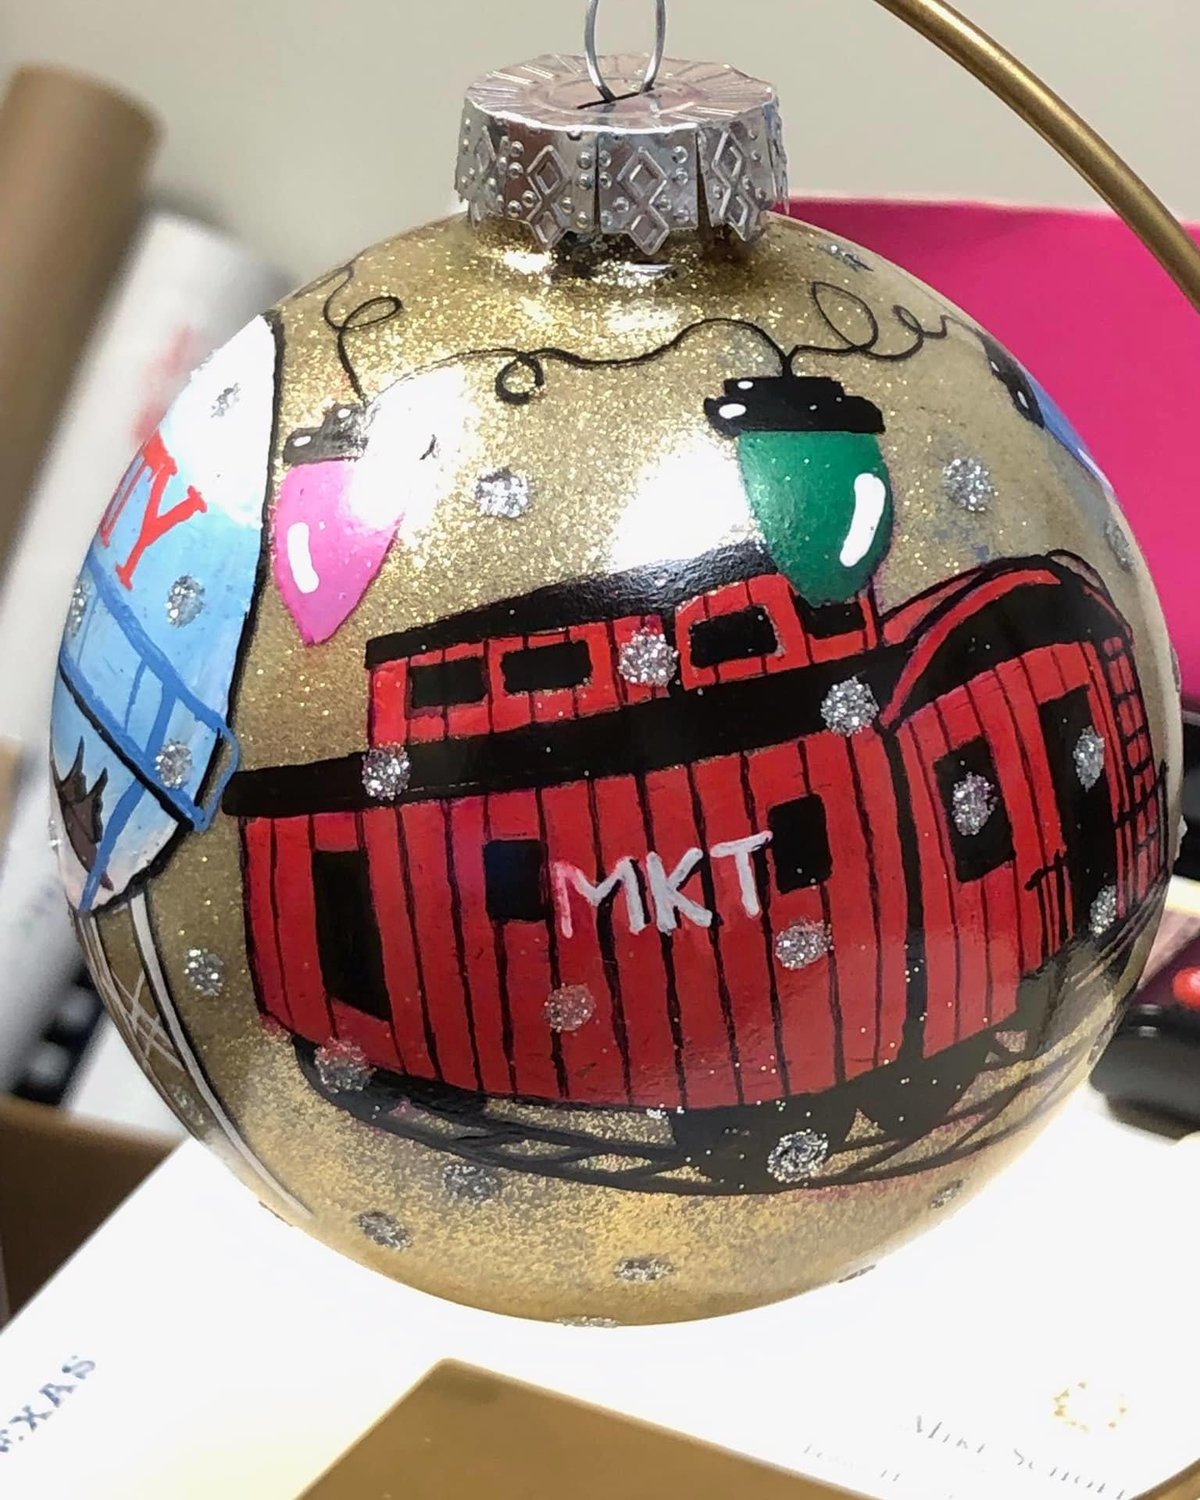 The ornament features an image of the iconic Katy caboose